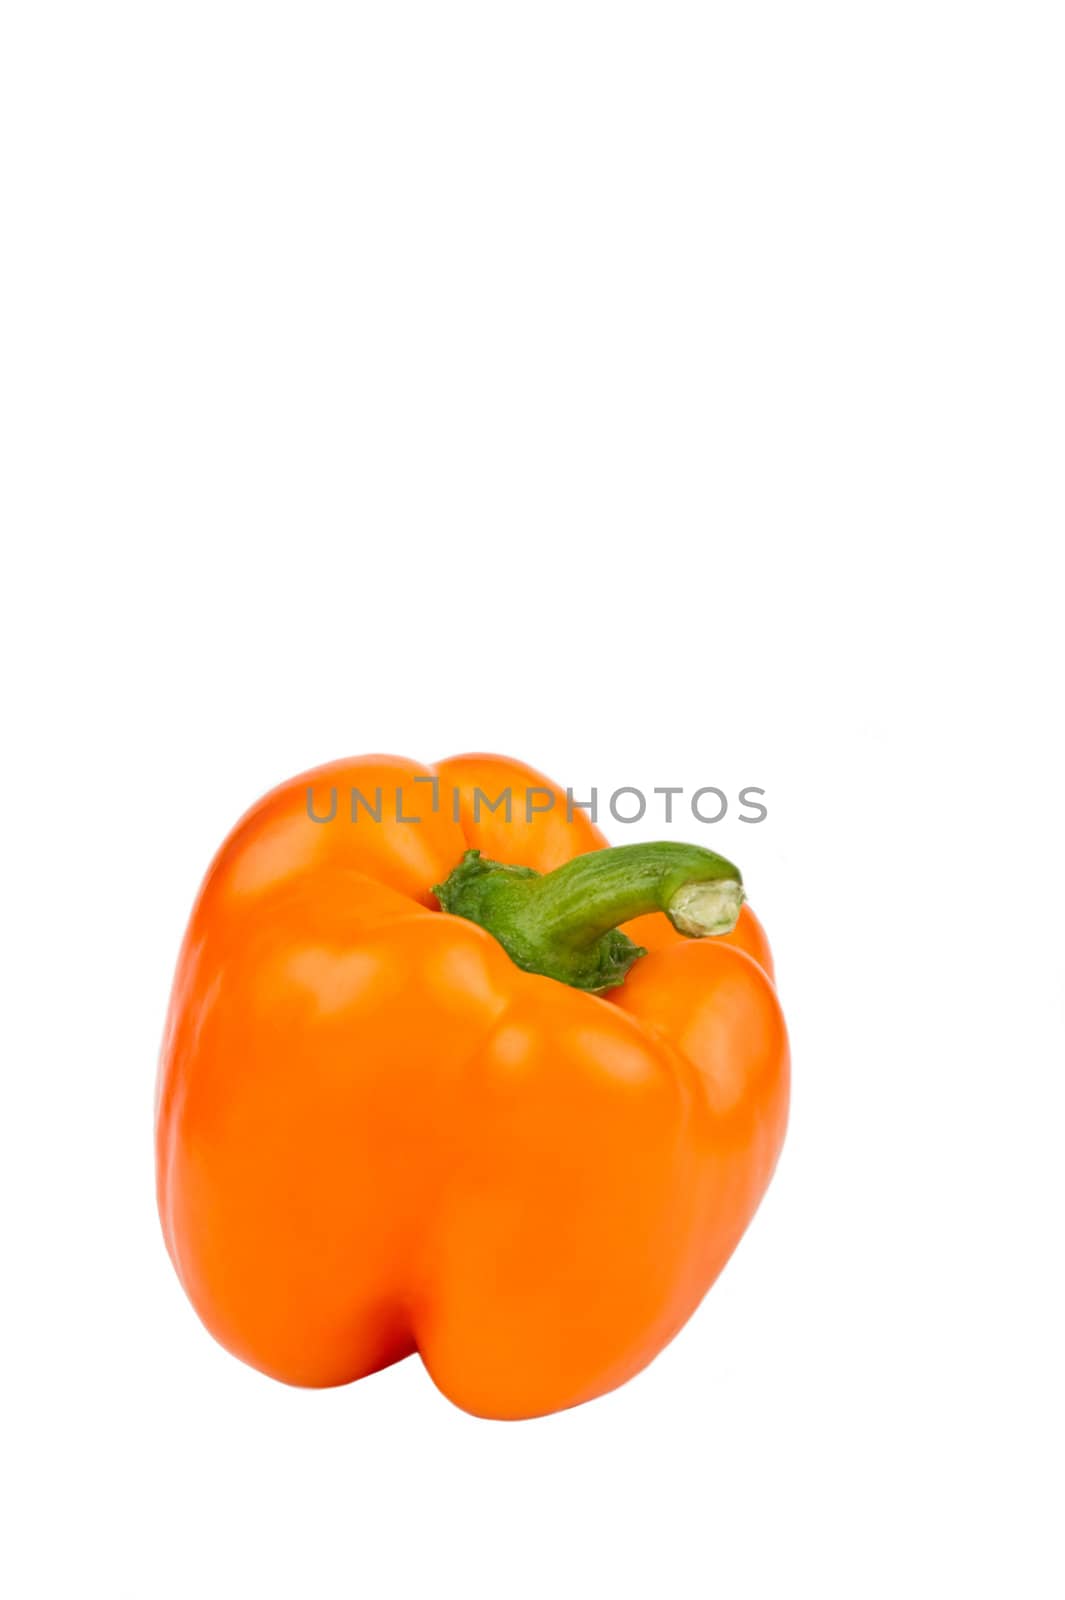 Image of an orange bell pepper on a white background